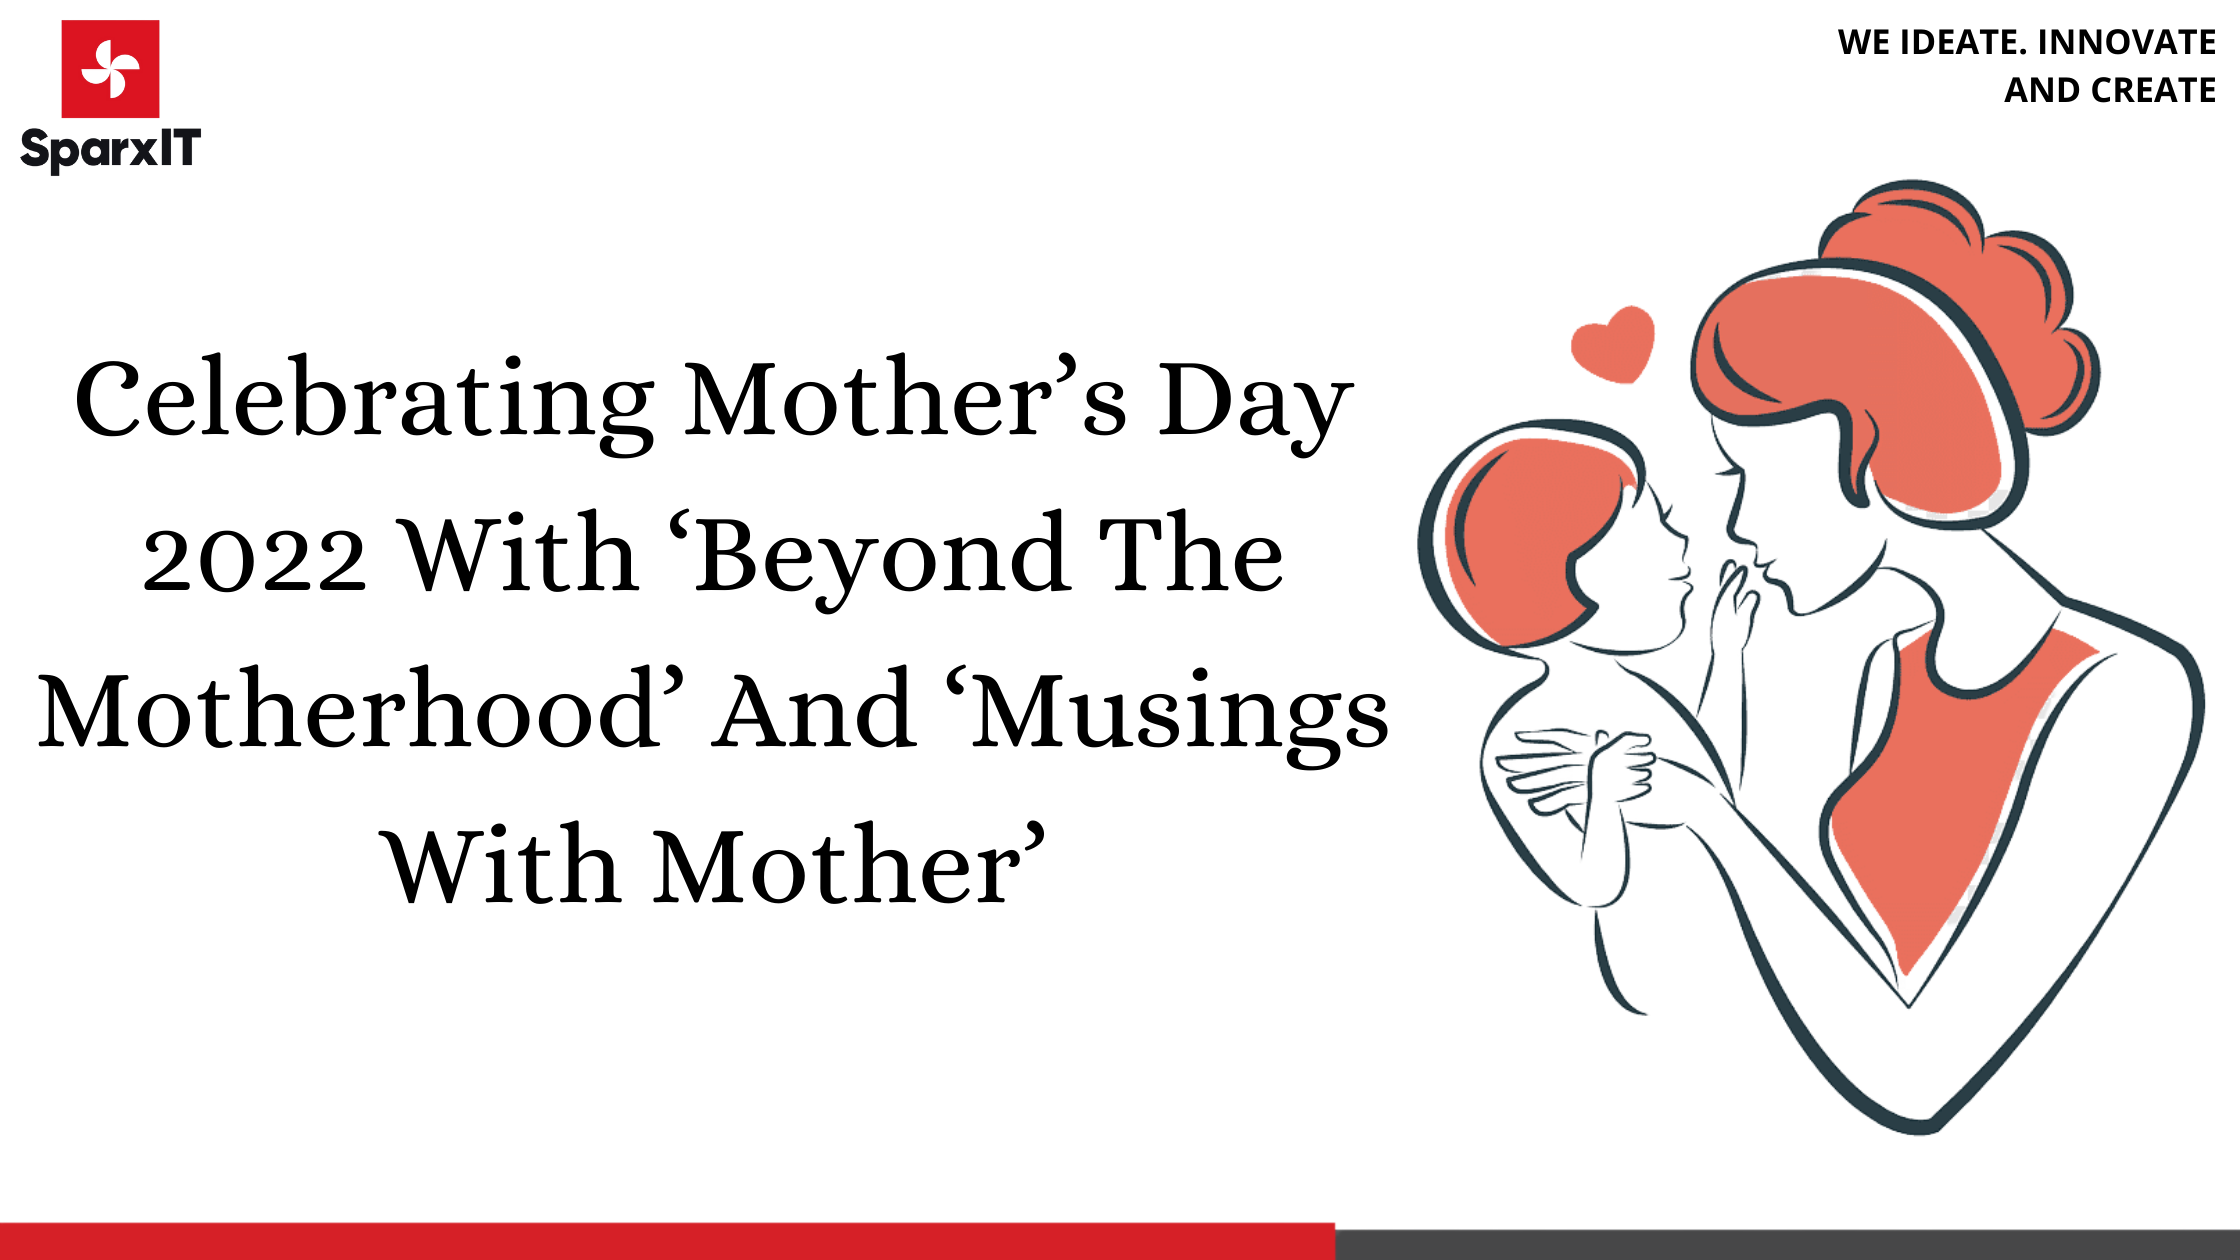 Celebrating Mother’s Day 2022 With ‘Beyond The Motherhood’ and ‘Musings With Mother’